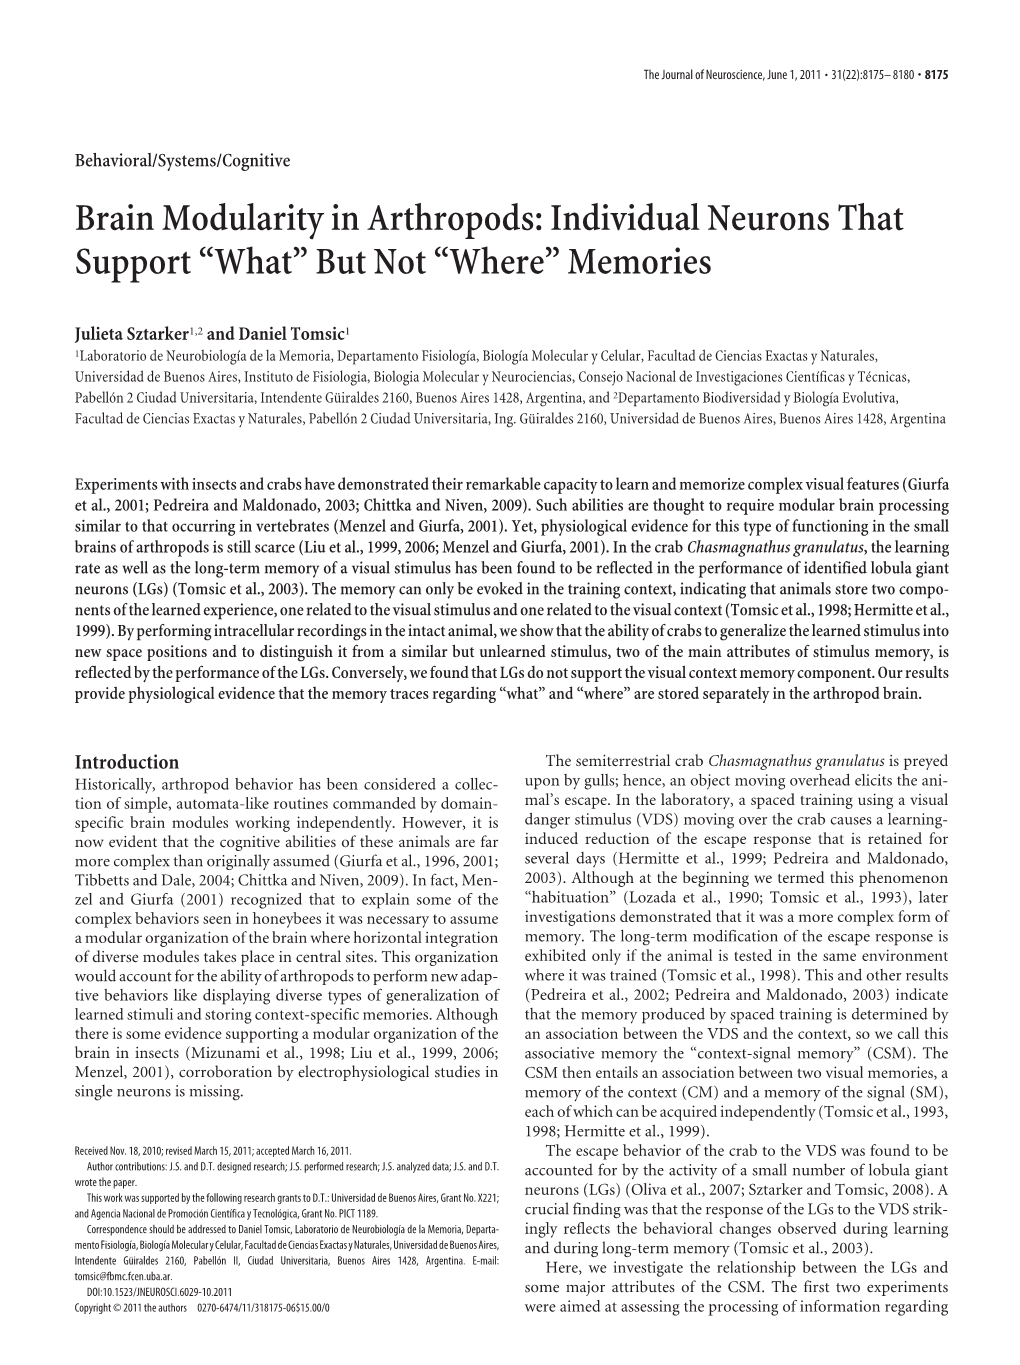 Brain Modularity in Arthropods: Individual Neurons That Support “What” but Not “Where” Memories